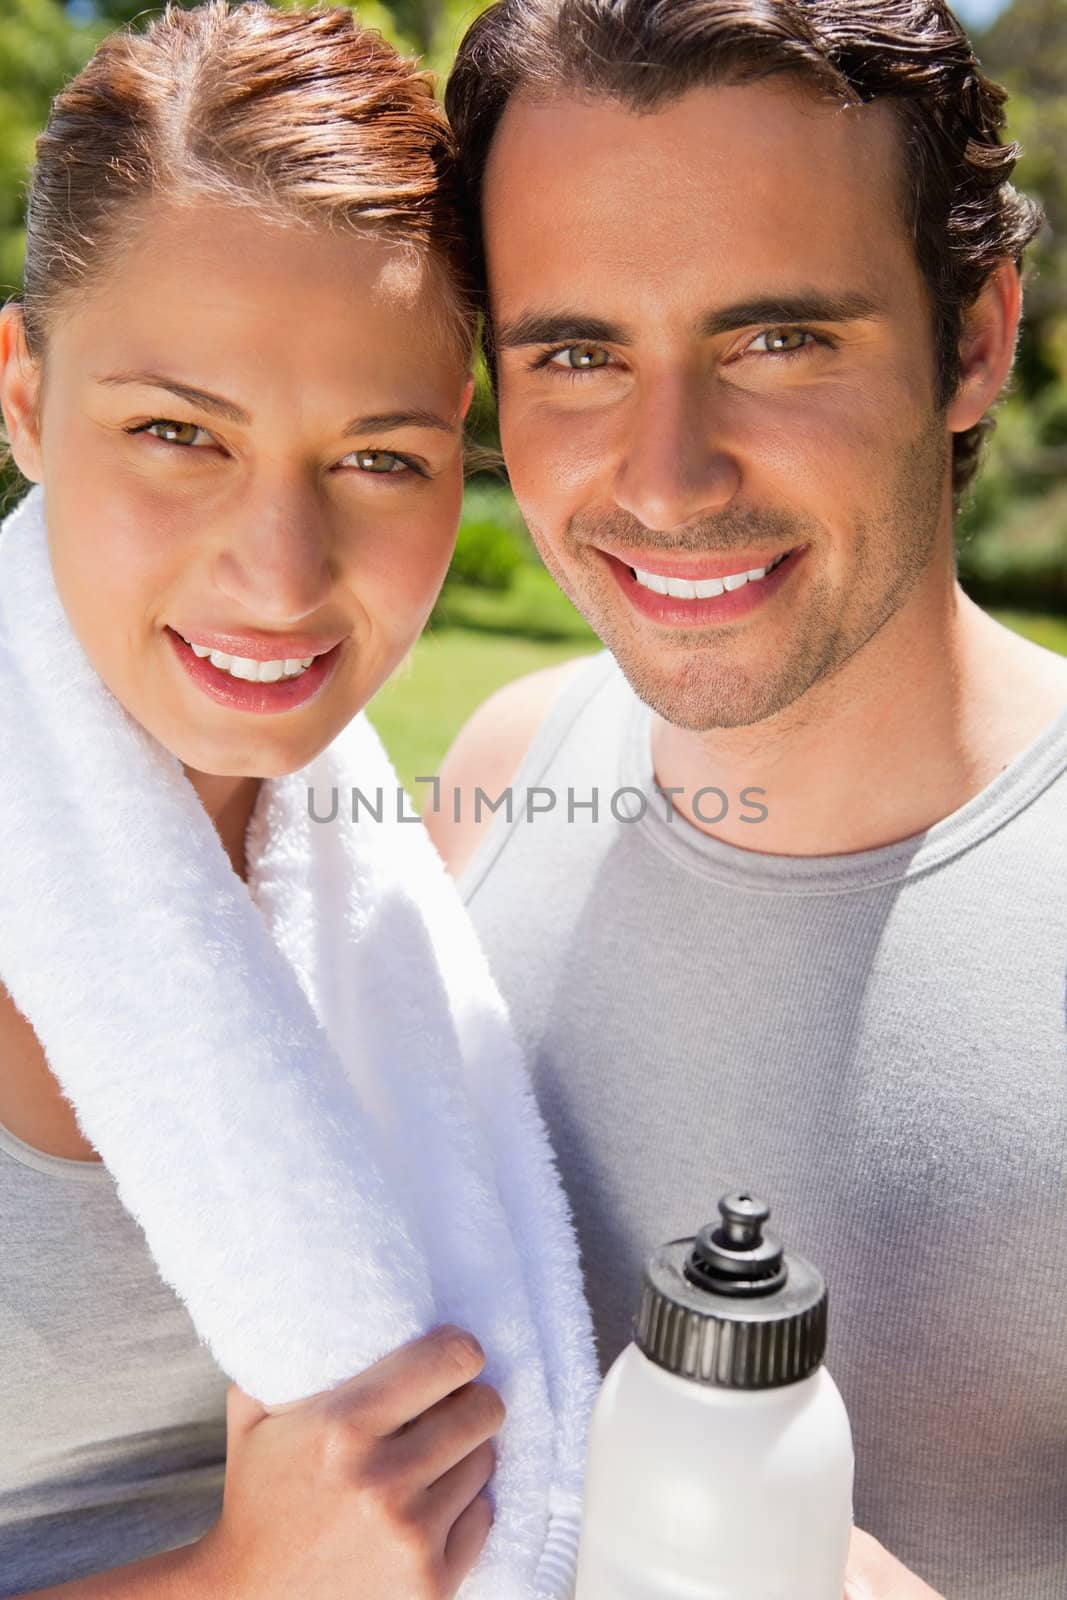 Smiling man holding a sports bottle with a woman who is smiling while holding a towel